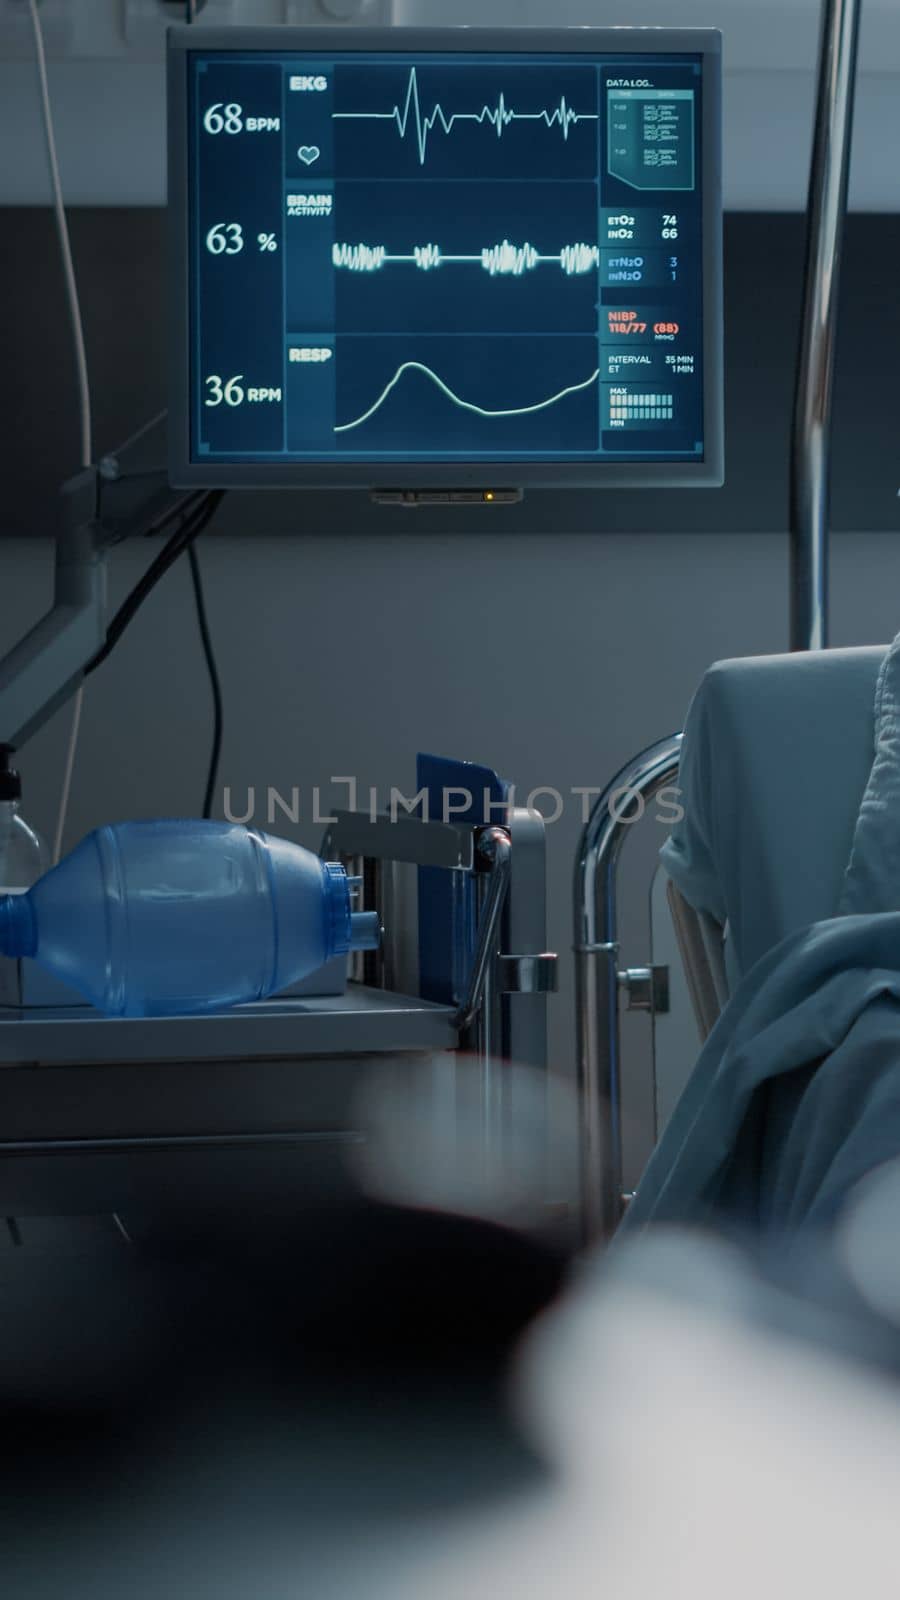 Nobody in hospital ward filled with medical technology to cure health problems, injury, illness and disease. Modern equipment as heart rate monitor, oxygen tube, IV drip bag and wheelchair